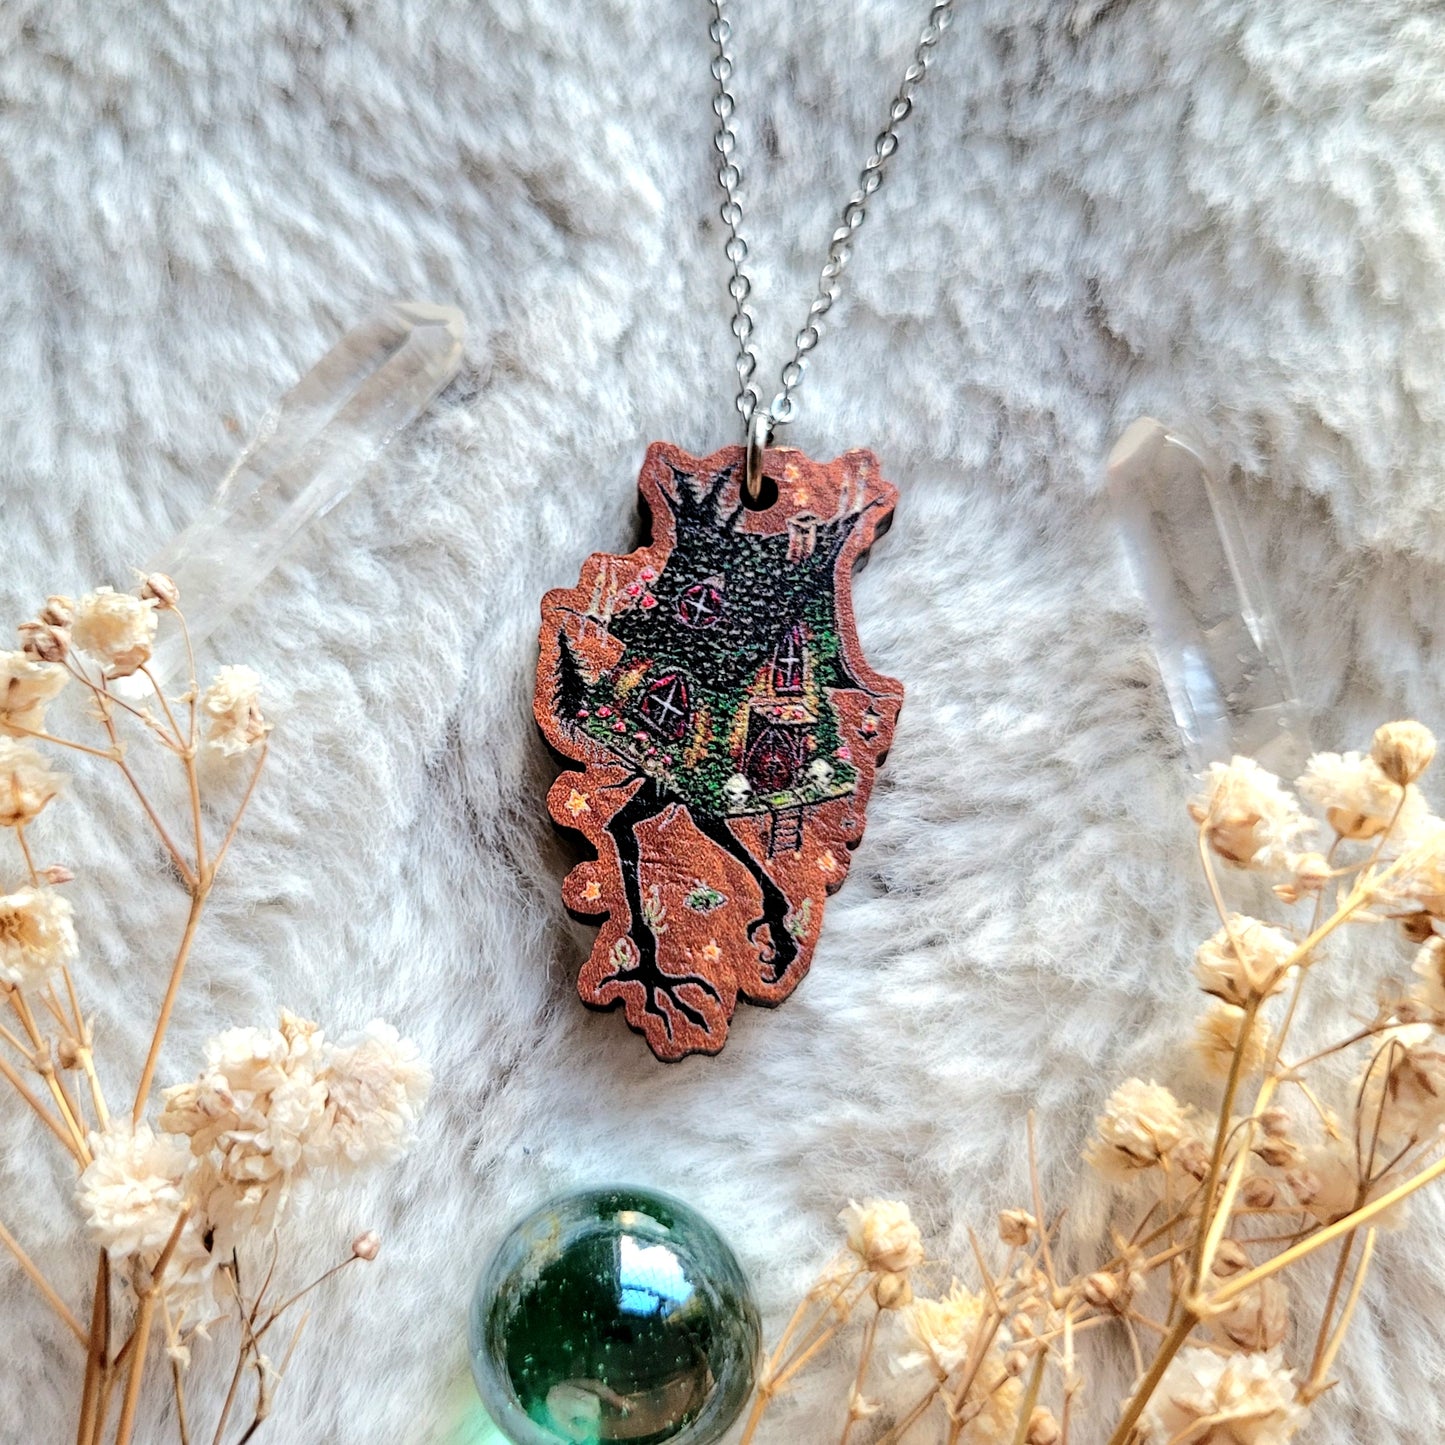 Baba Yaga witches hut Illustrated necklace, responsibly sourced cherry wood, chain options available, by Grace Moth